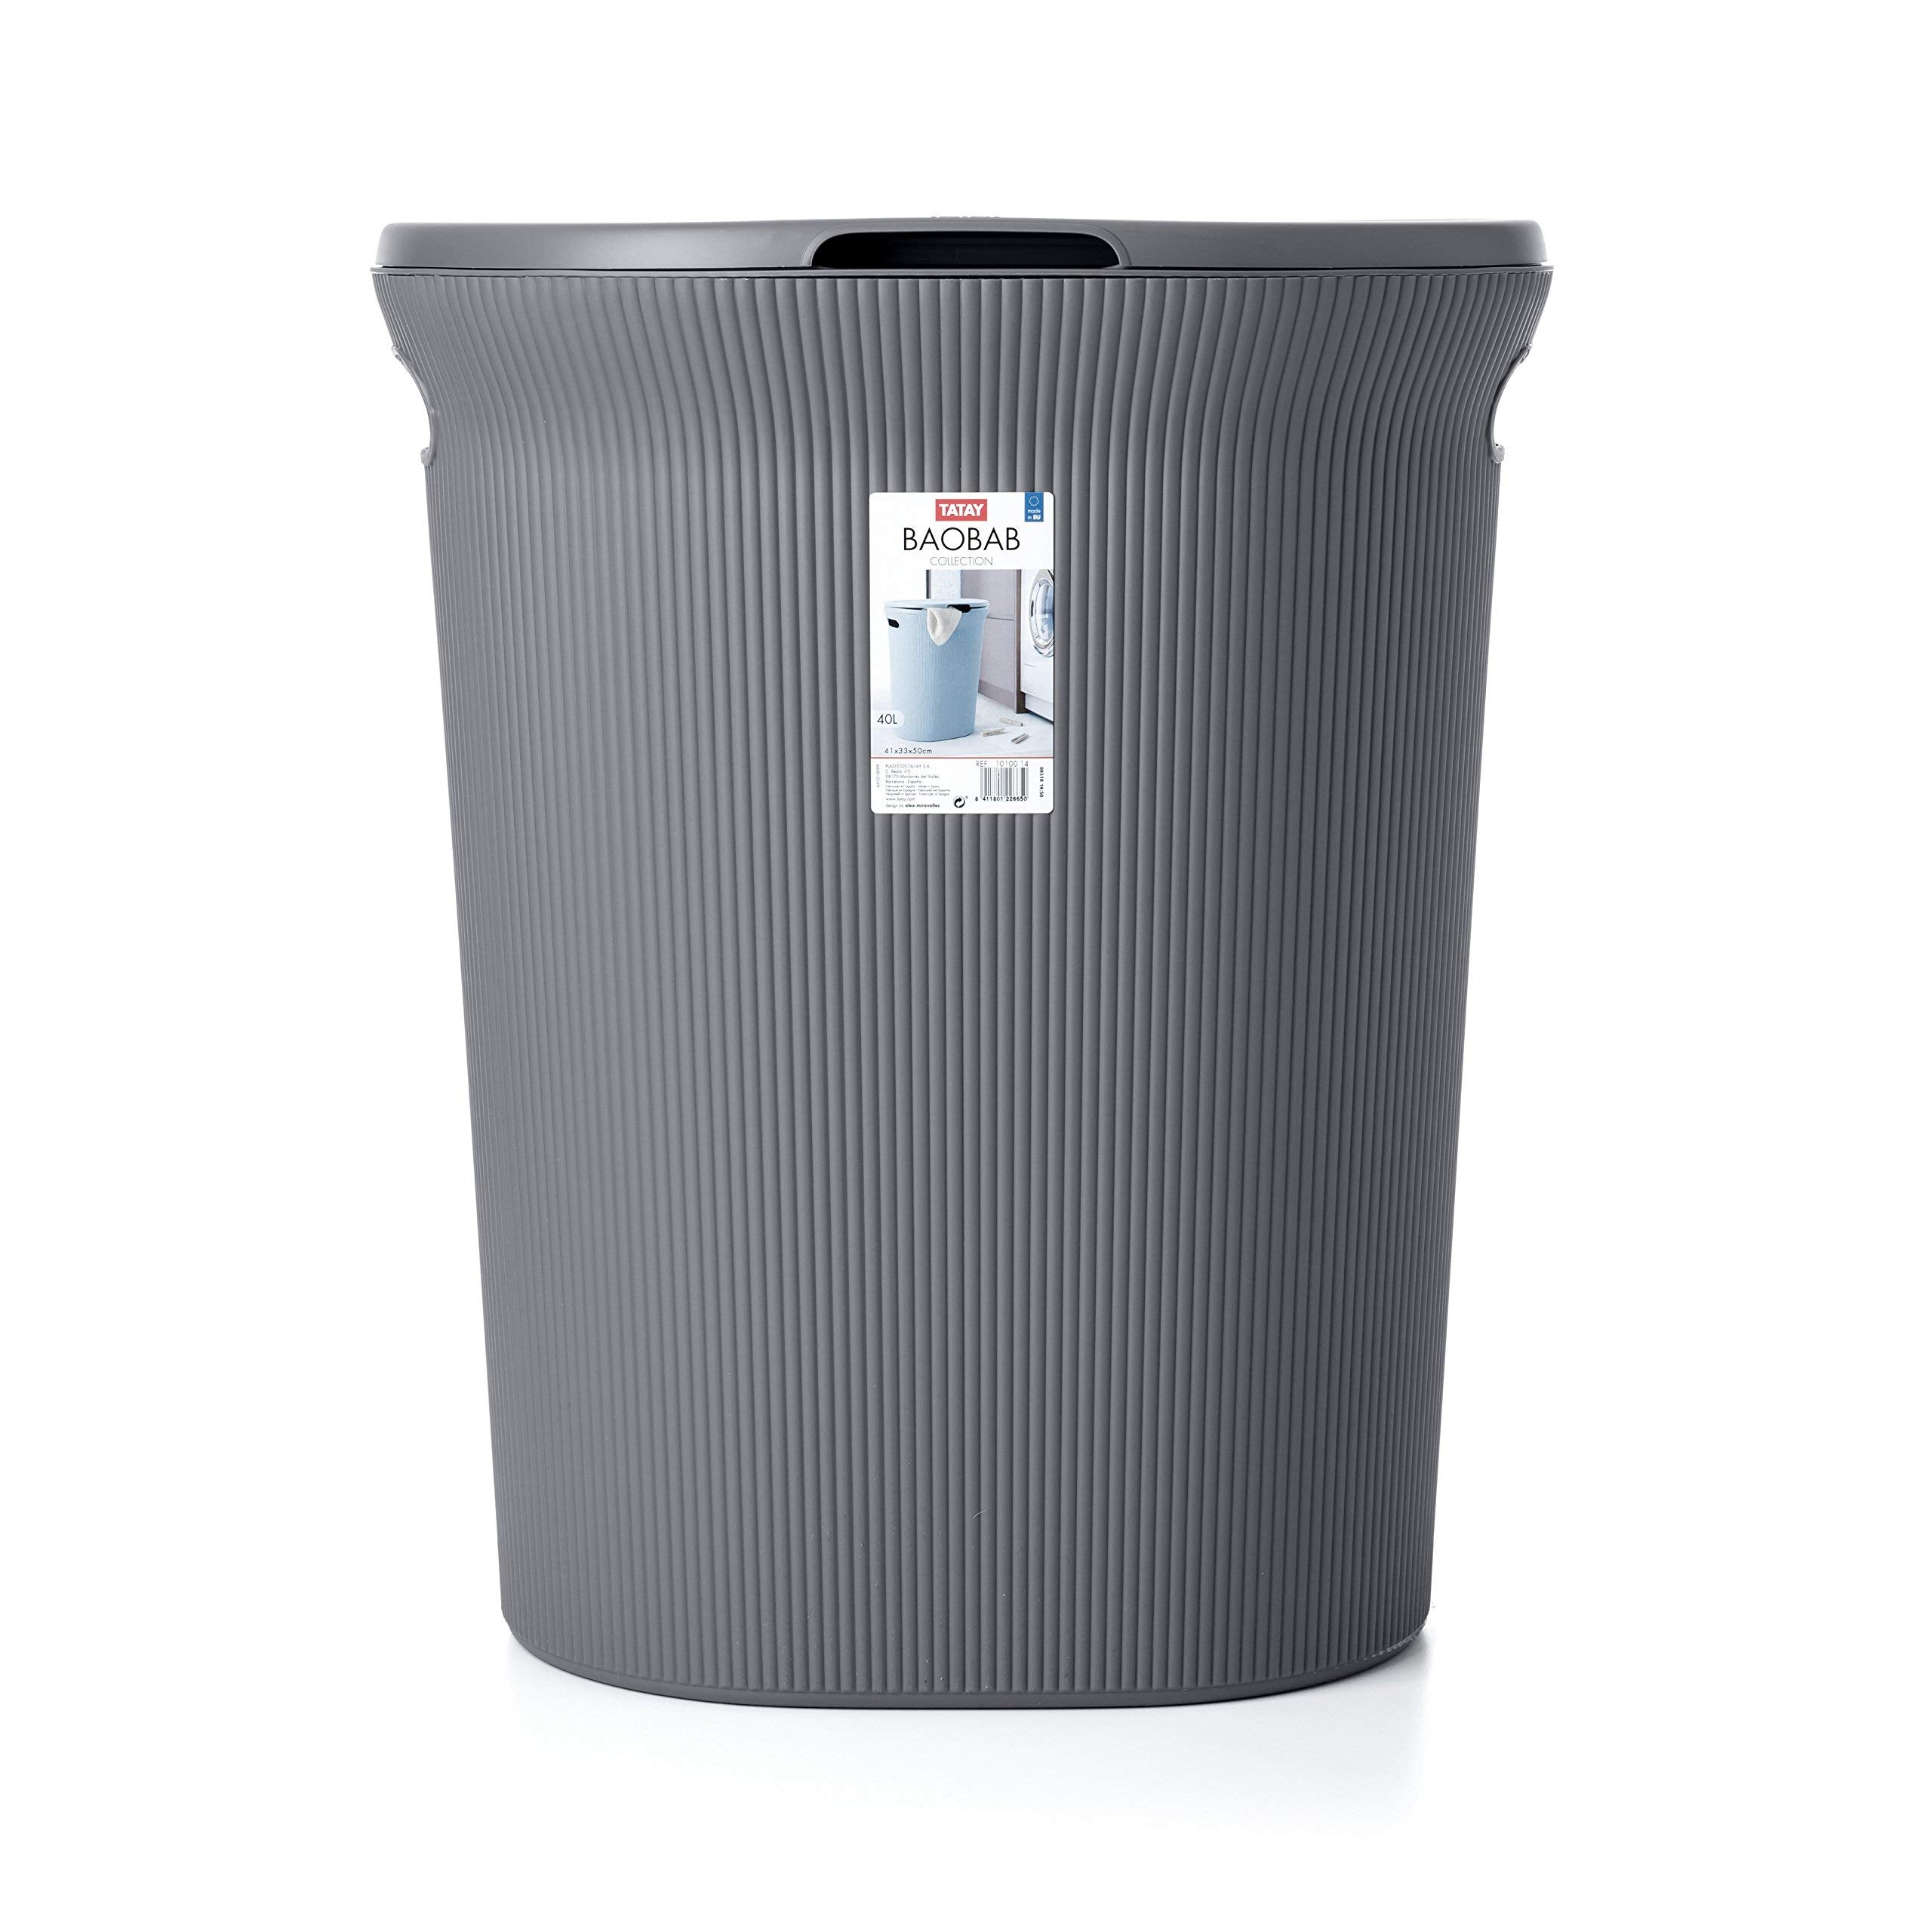 Laundry Basket with lid - Grey